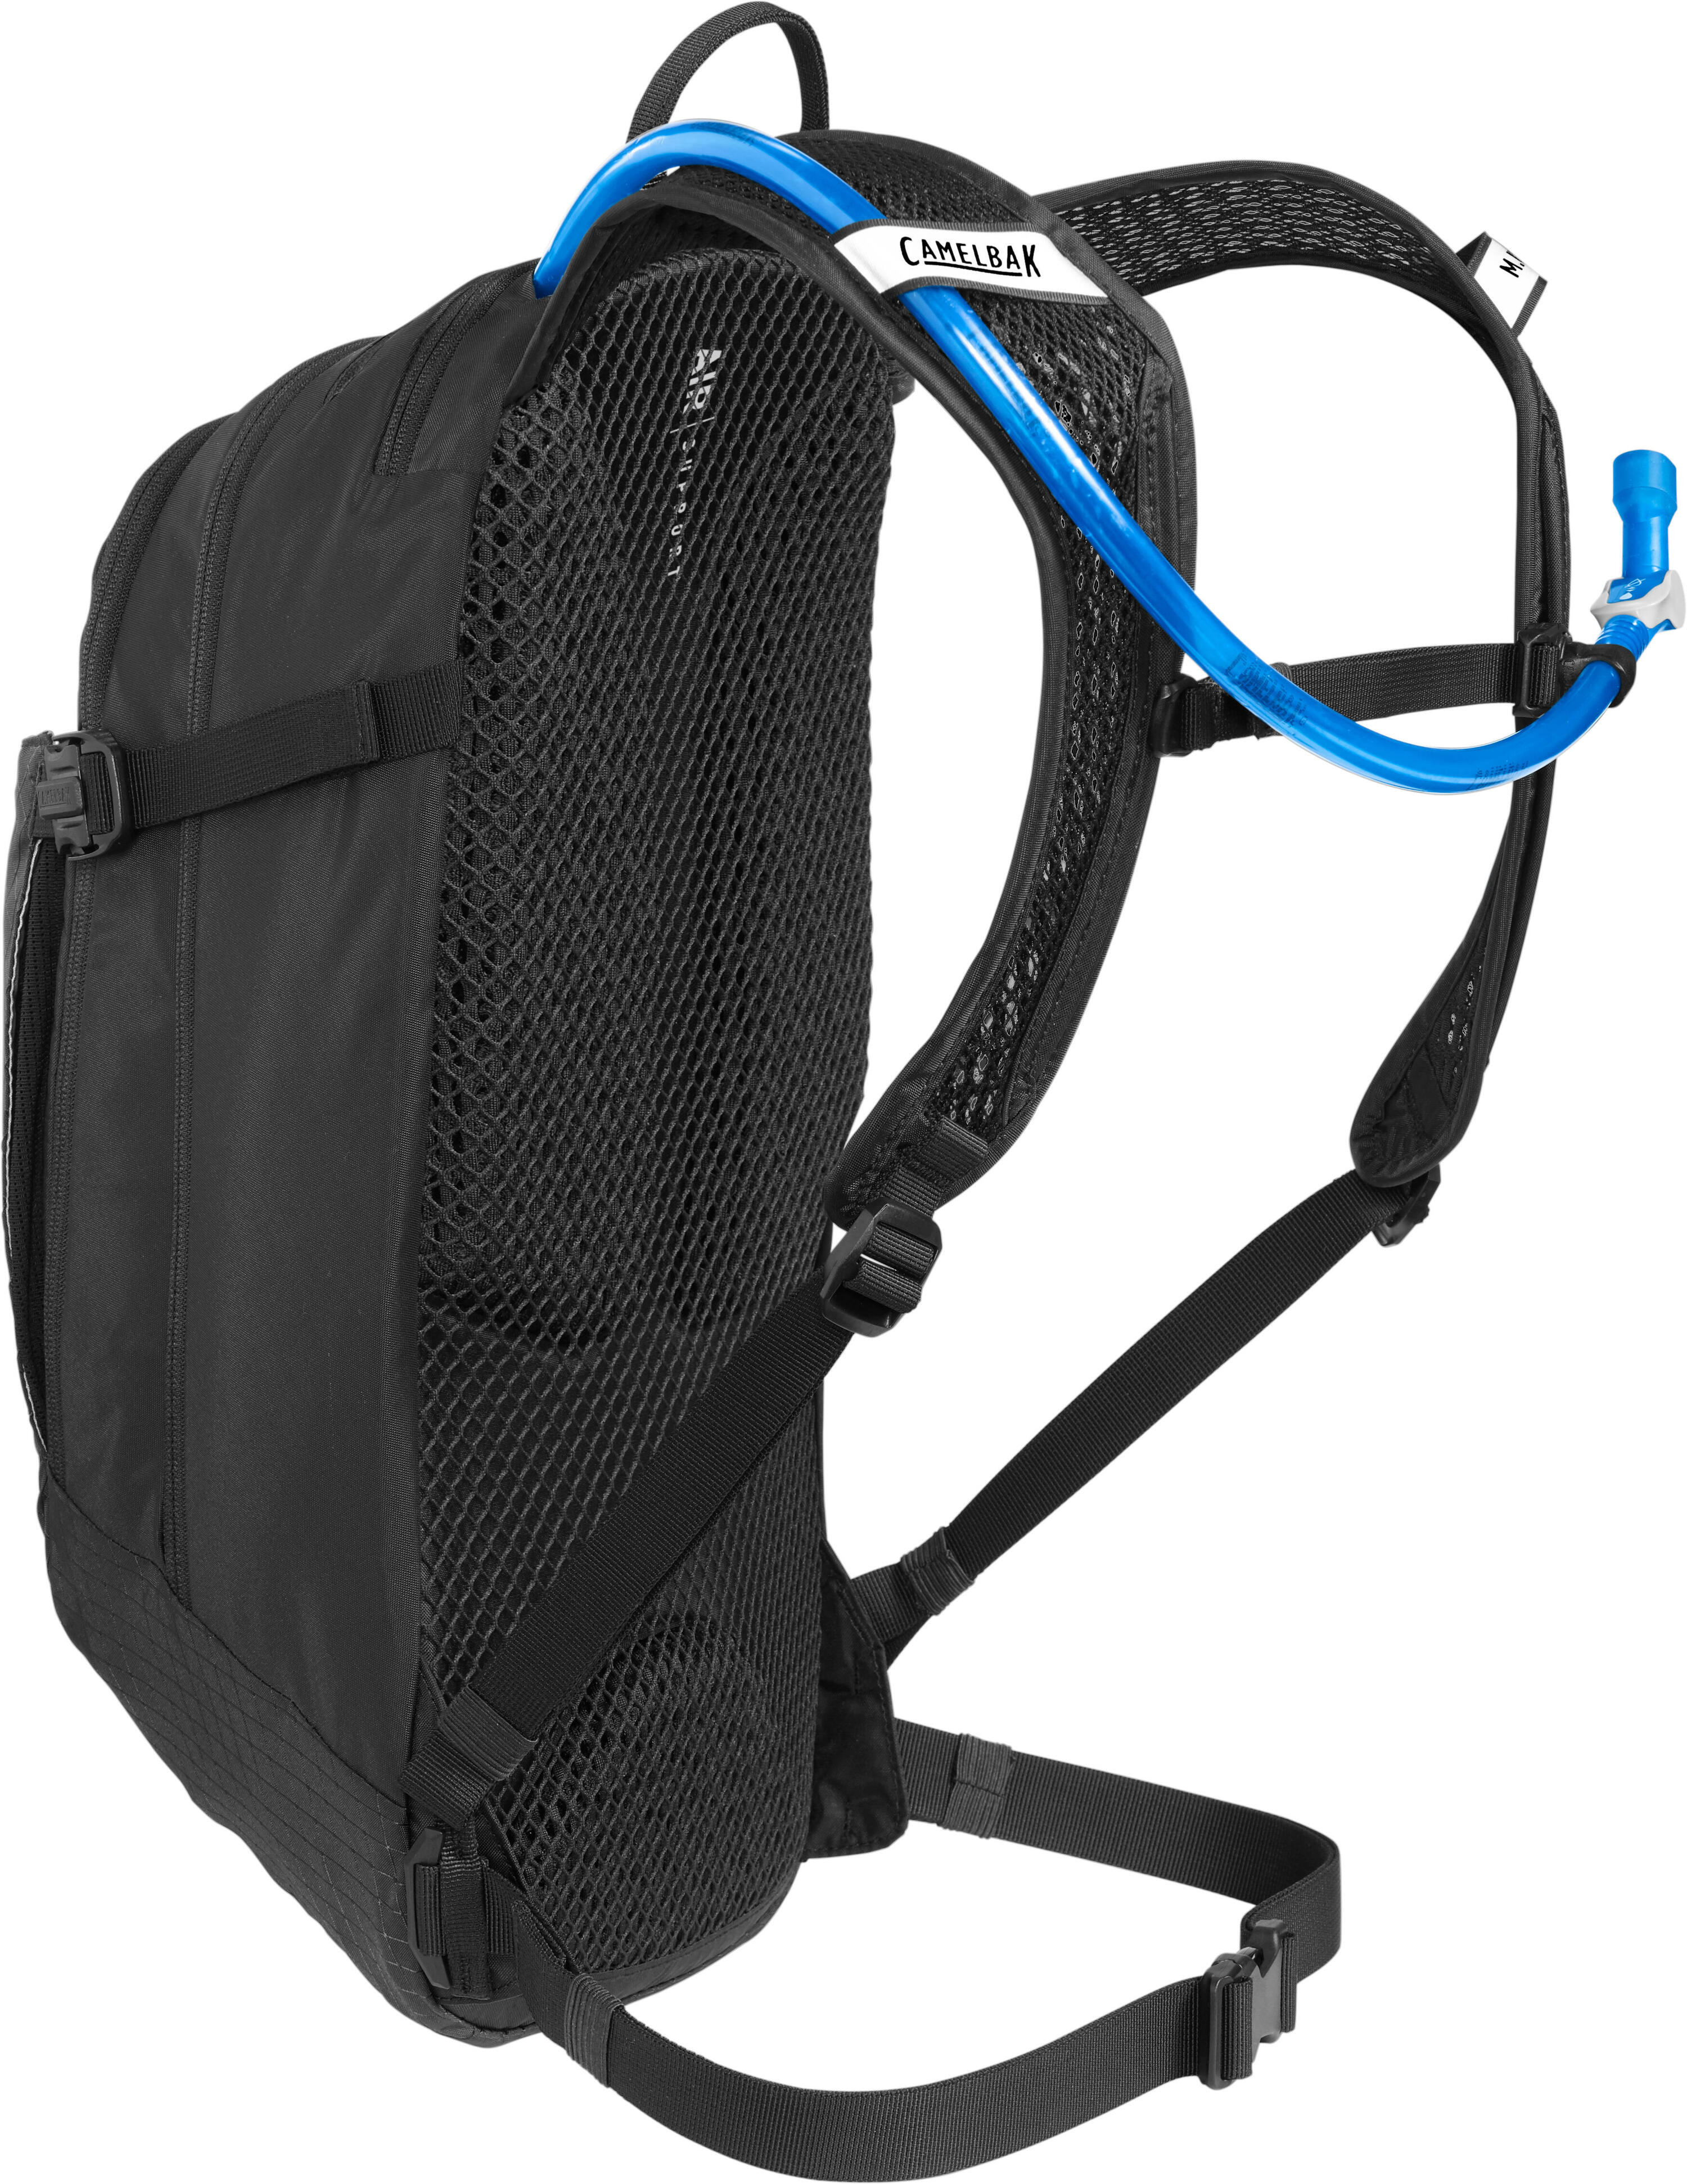 M.U.L.E. Hydration Pack 1with Reservoir 2/7